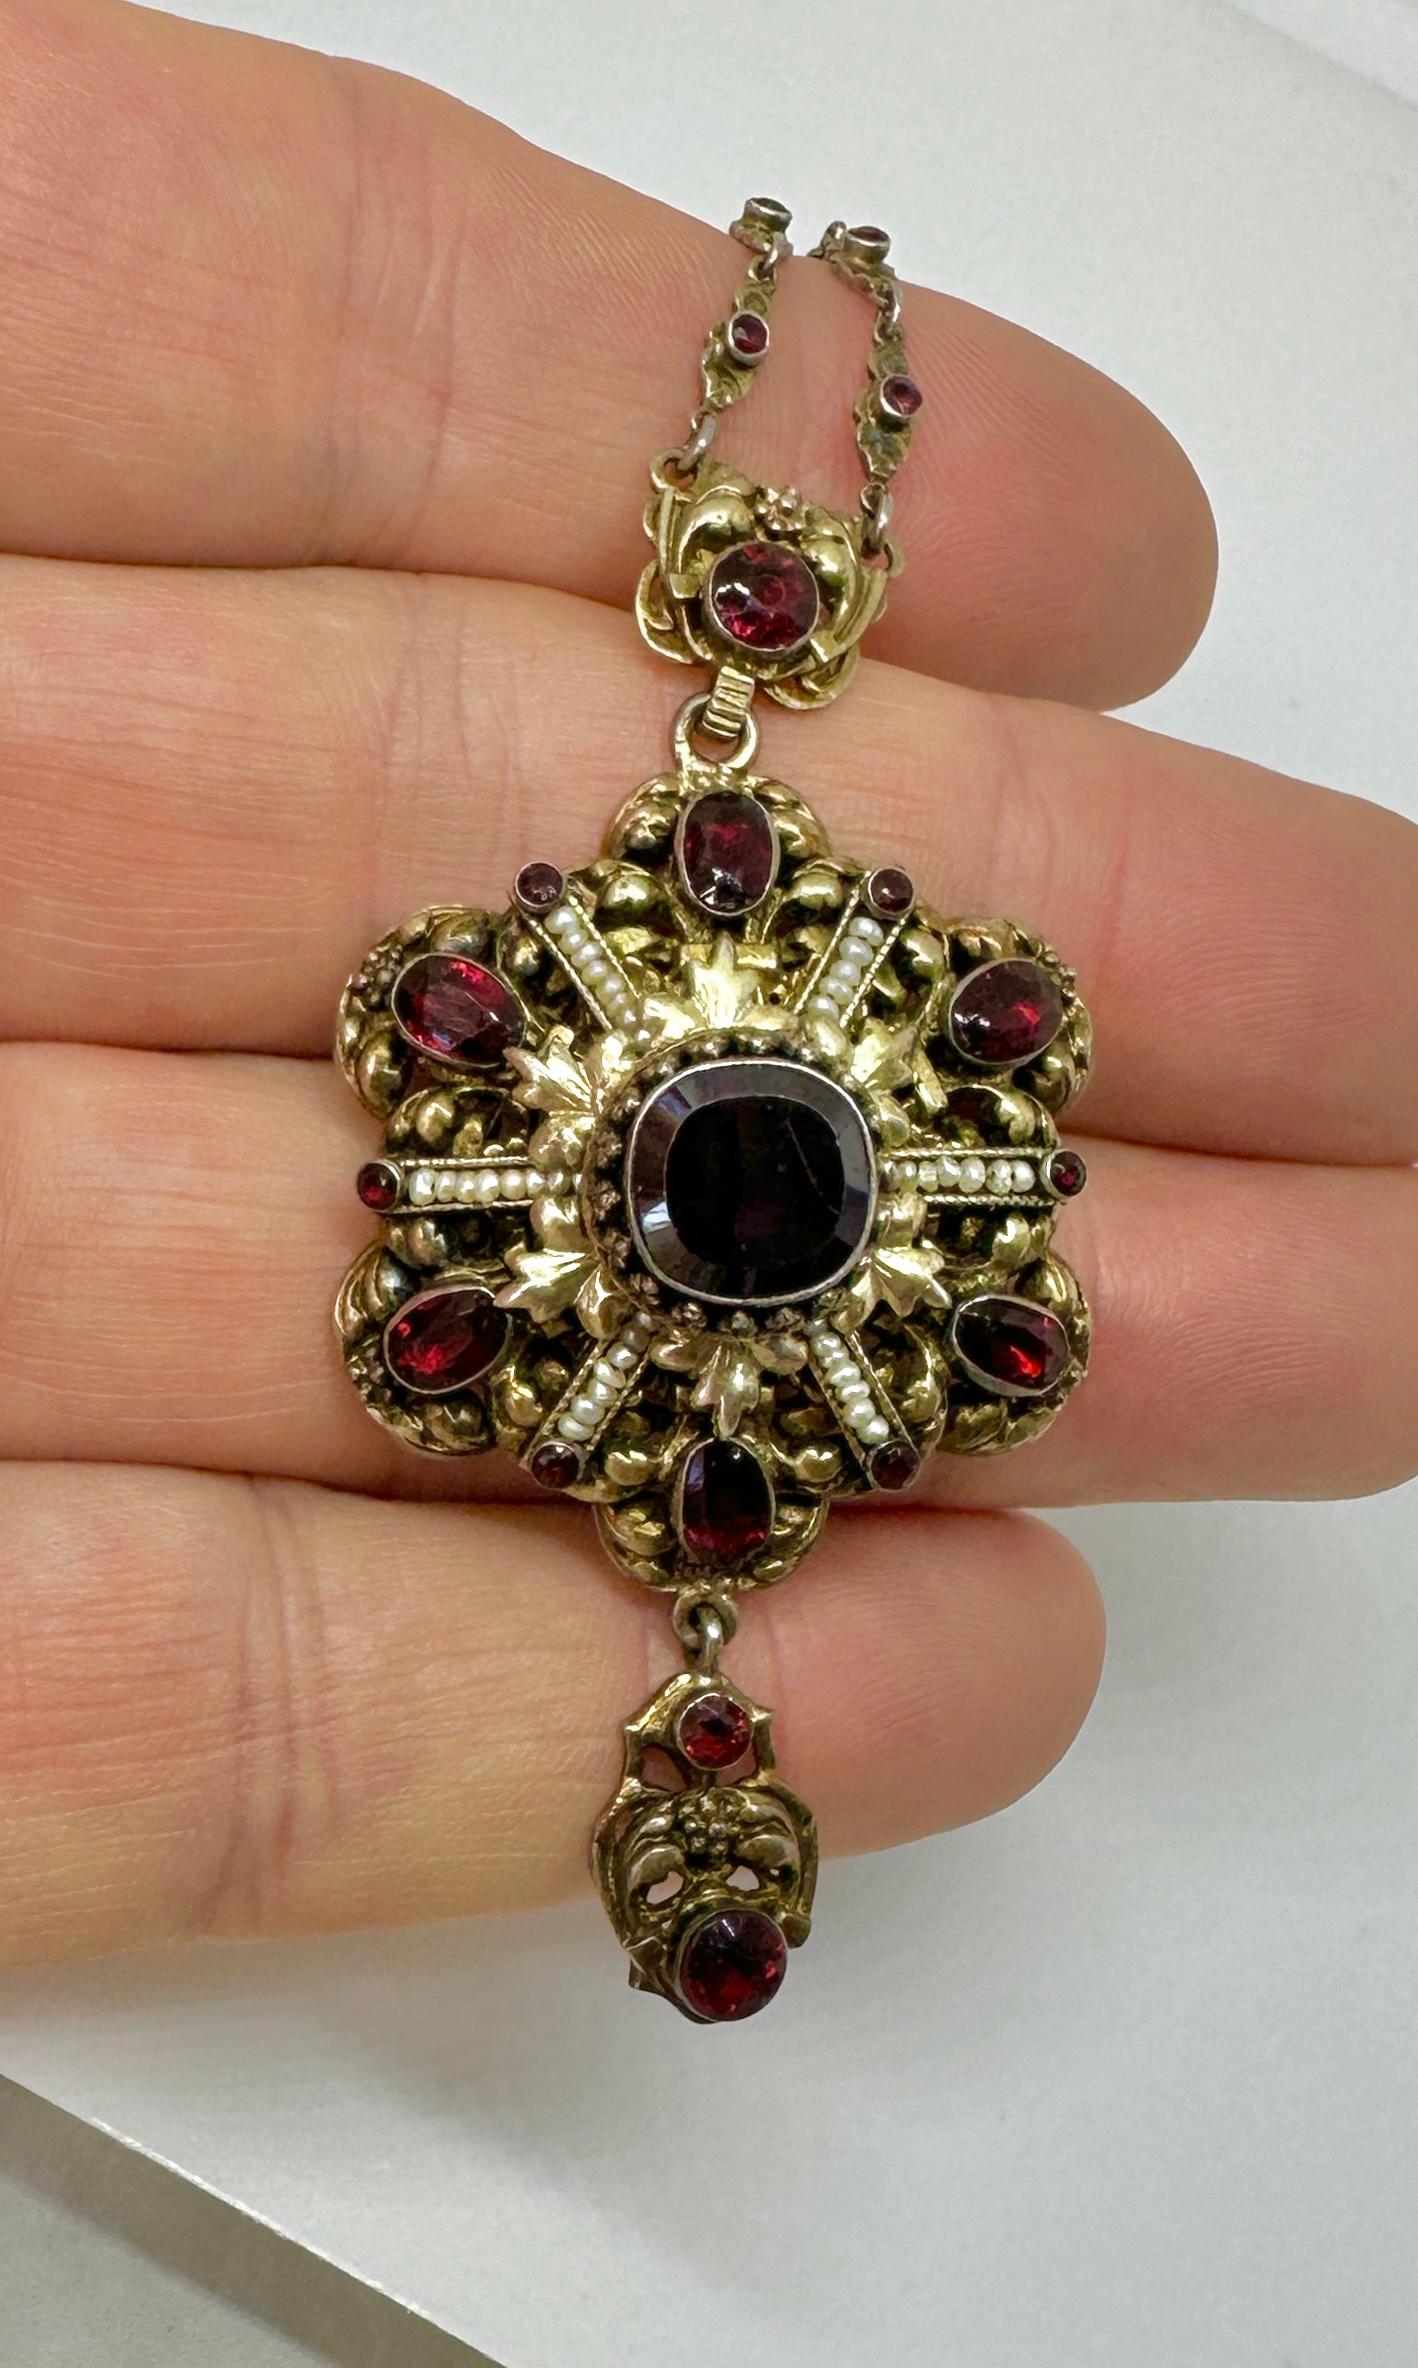 This is a magnificent antique Austro-Hungarian Garnet and Pearl Pendant Necklace with a Garnet set chain in a flower and leaf motif.  It is in the Renaissance Revival style in Silver Gilt and dates to circa 1870.  Recognizable by its bold use of